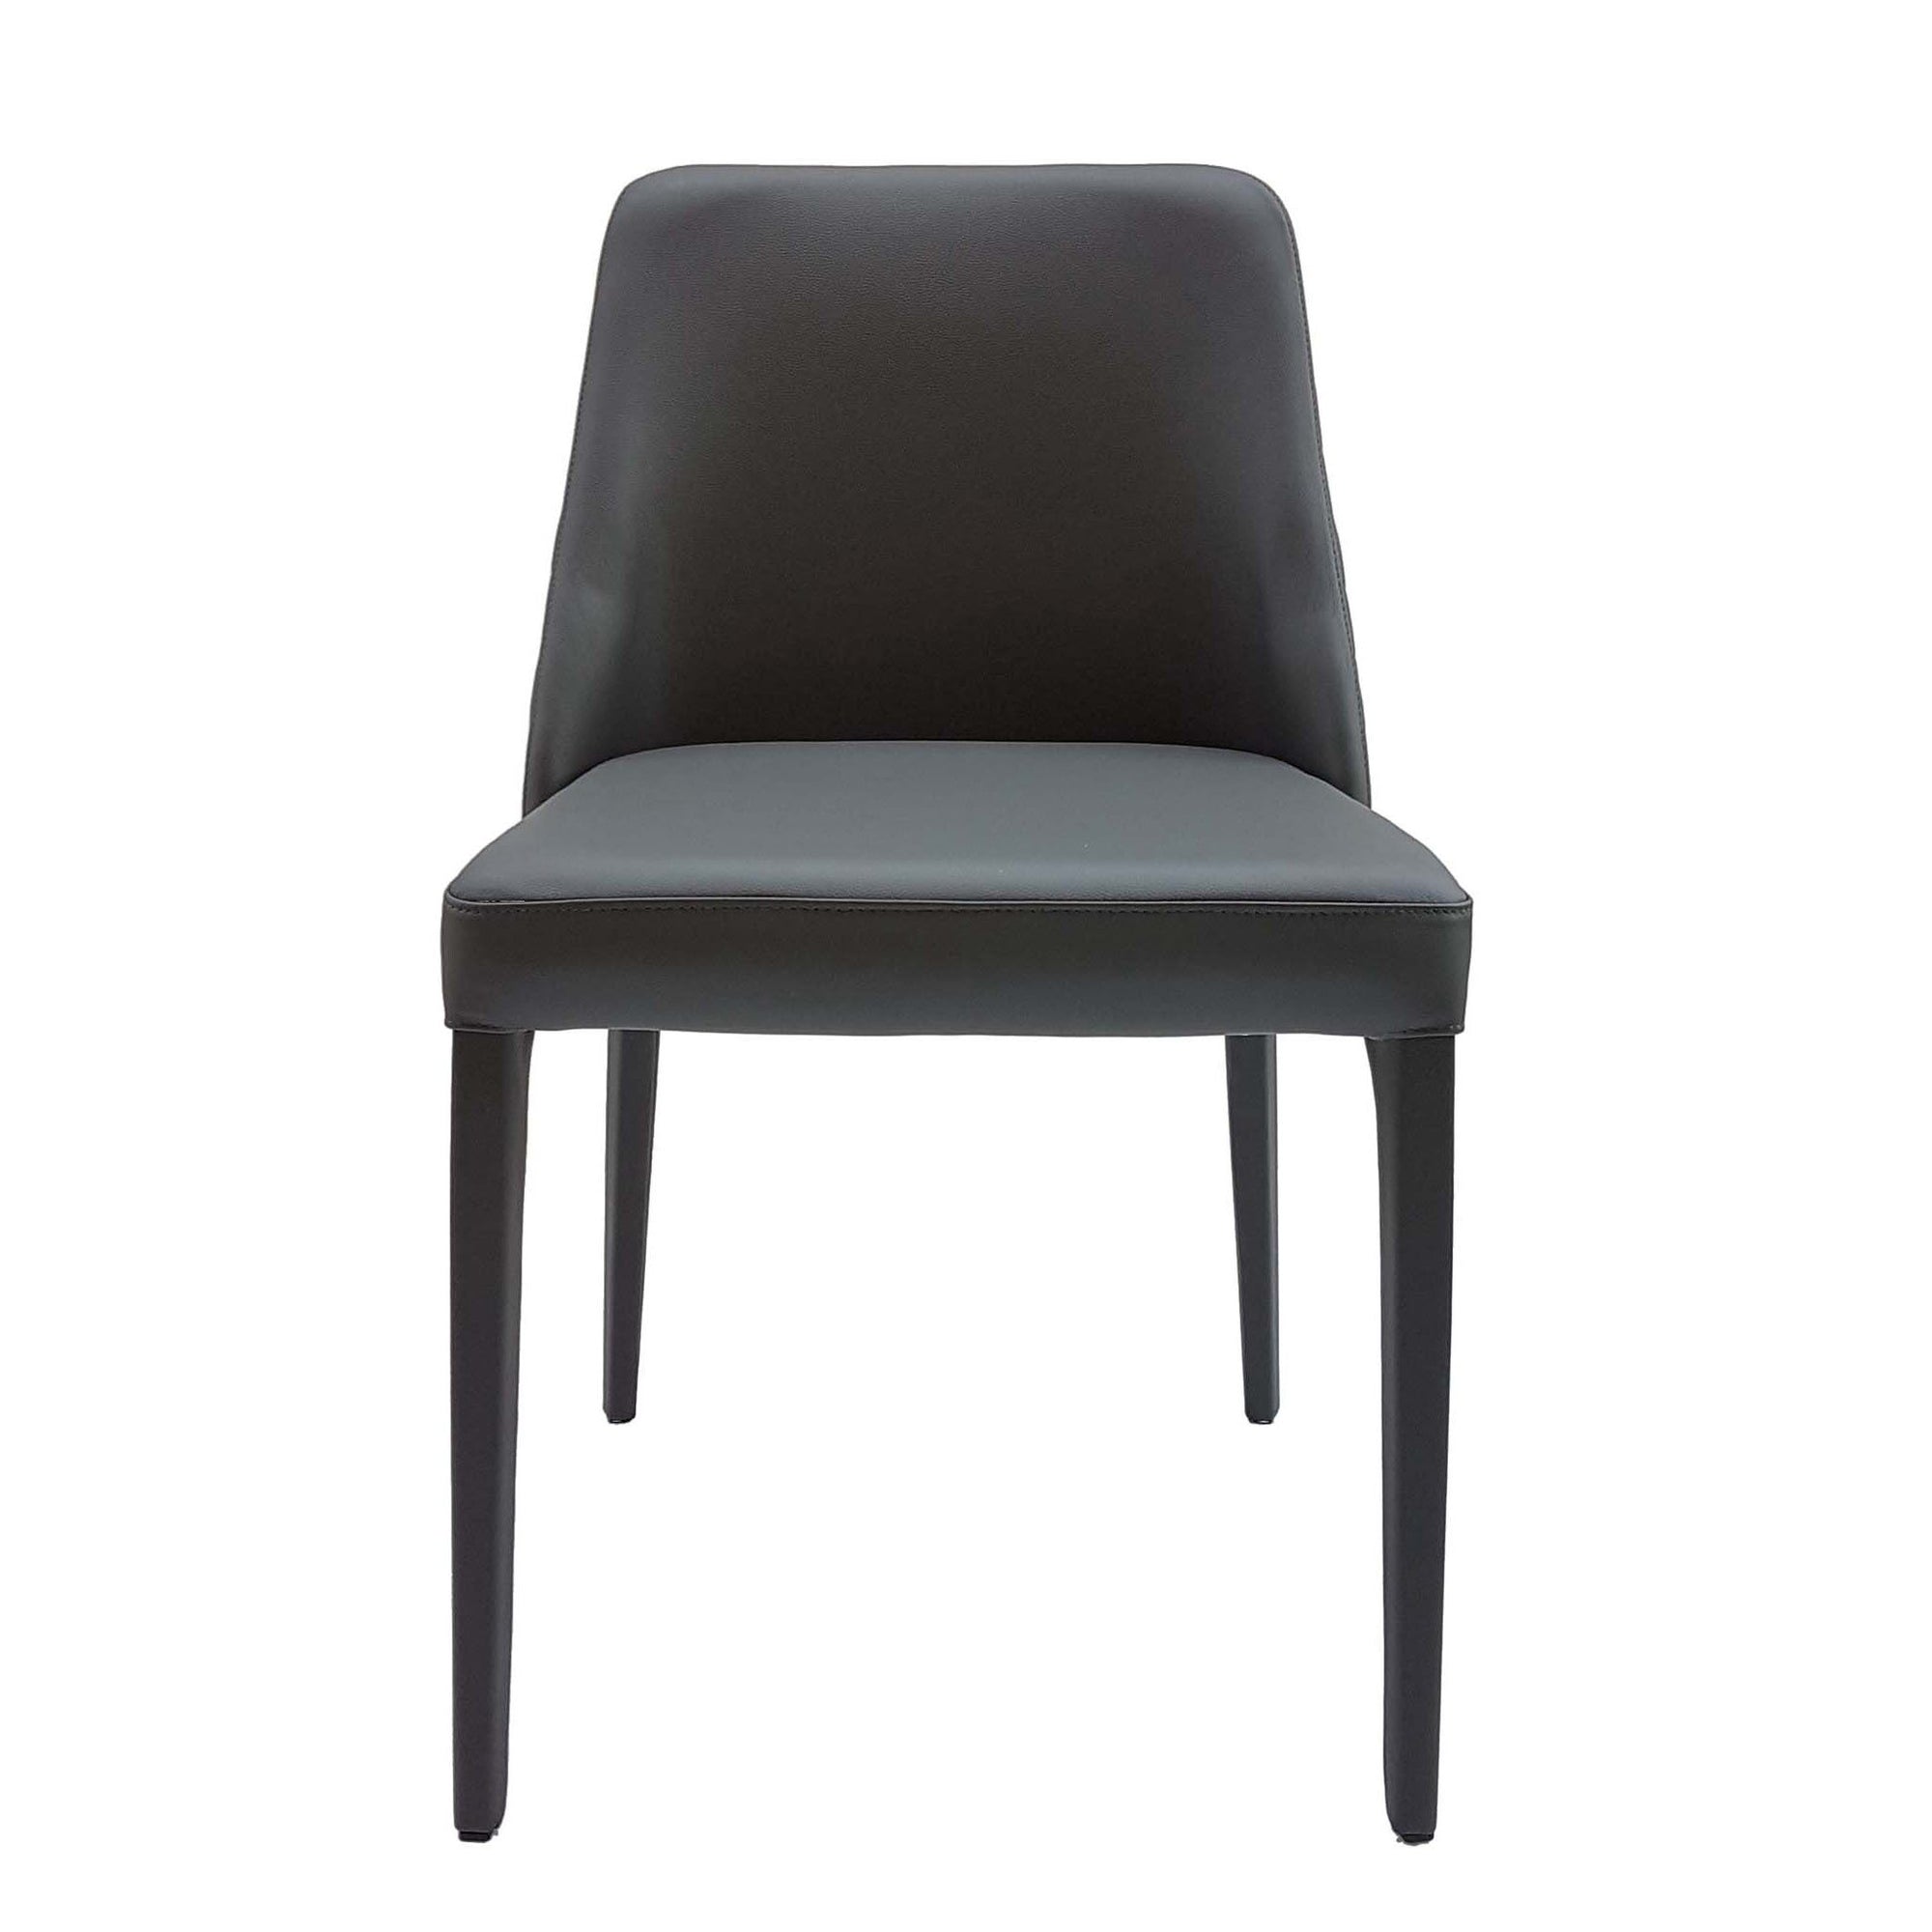 Bellini-Polly Chair, Anthracite-Dining Chairs-MODTEMPO